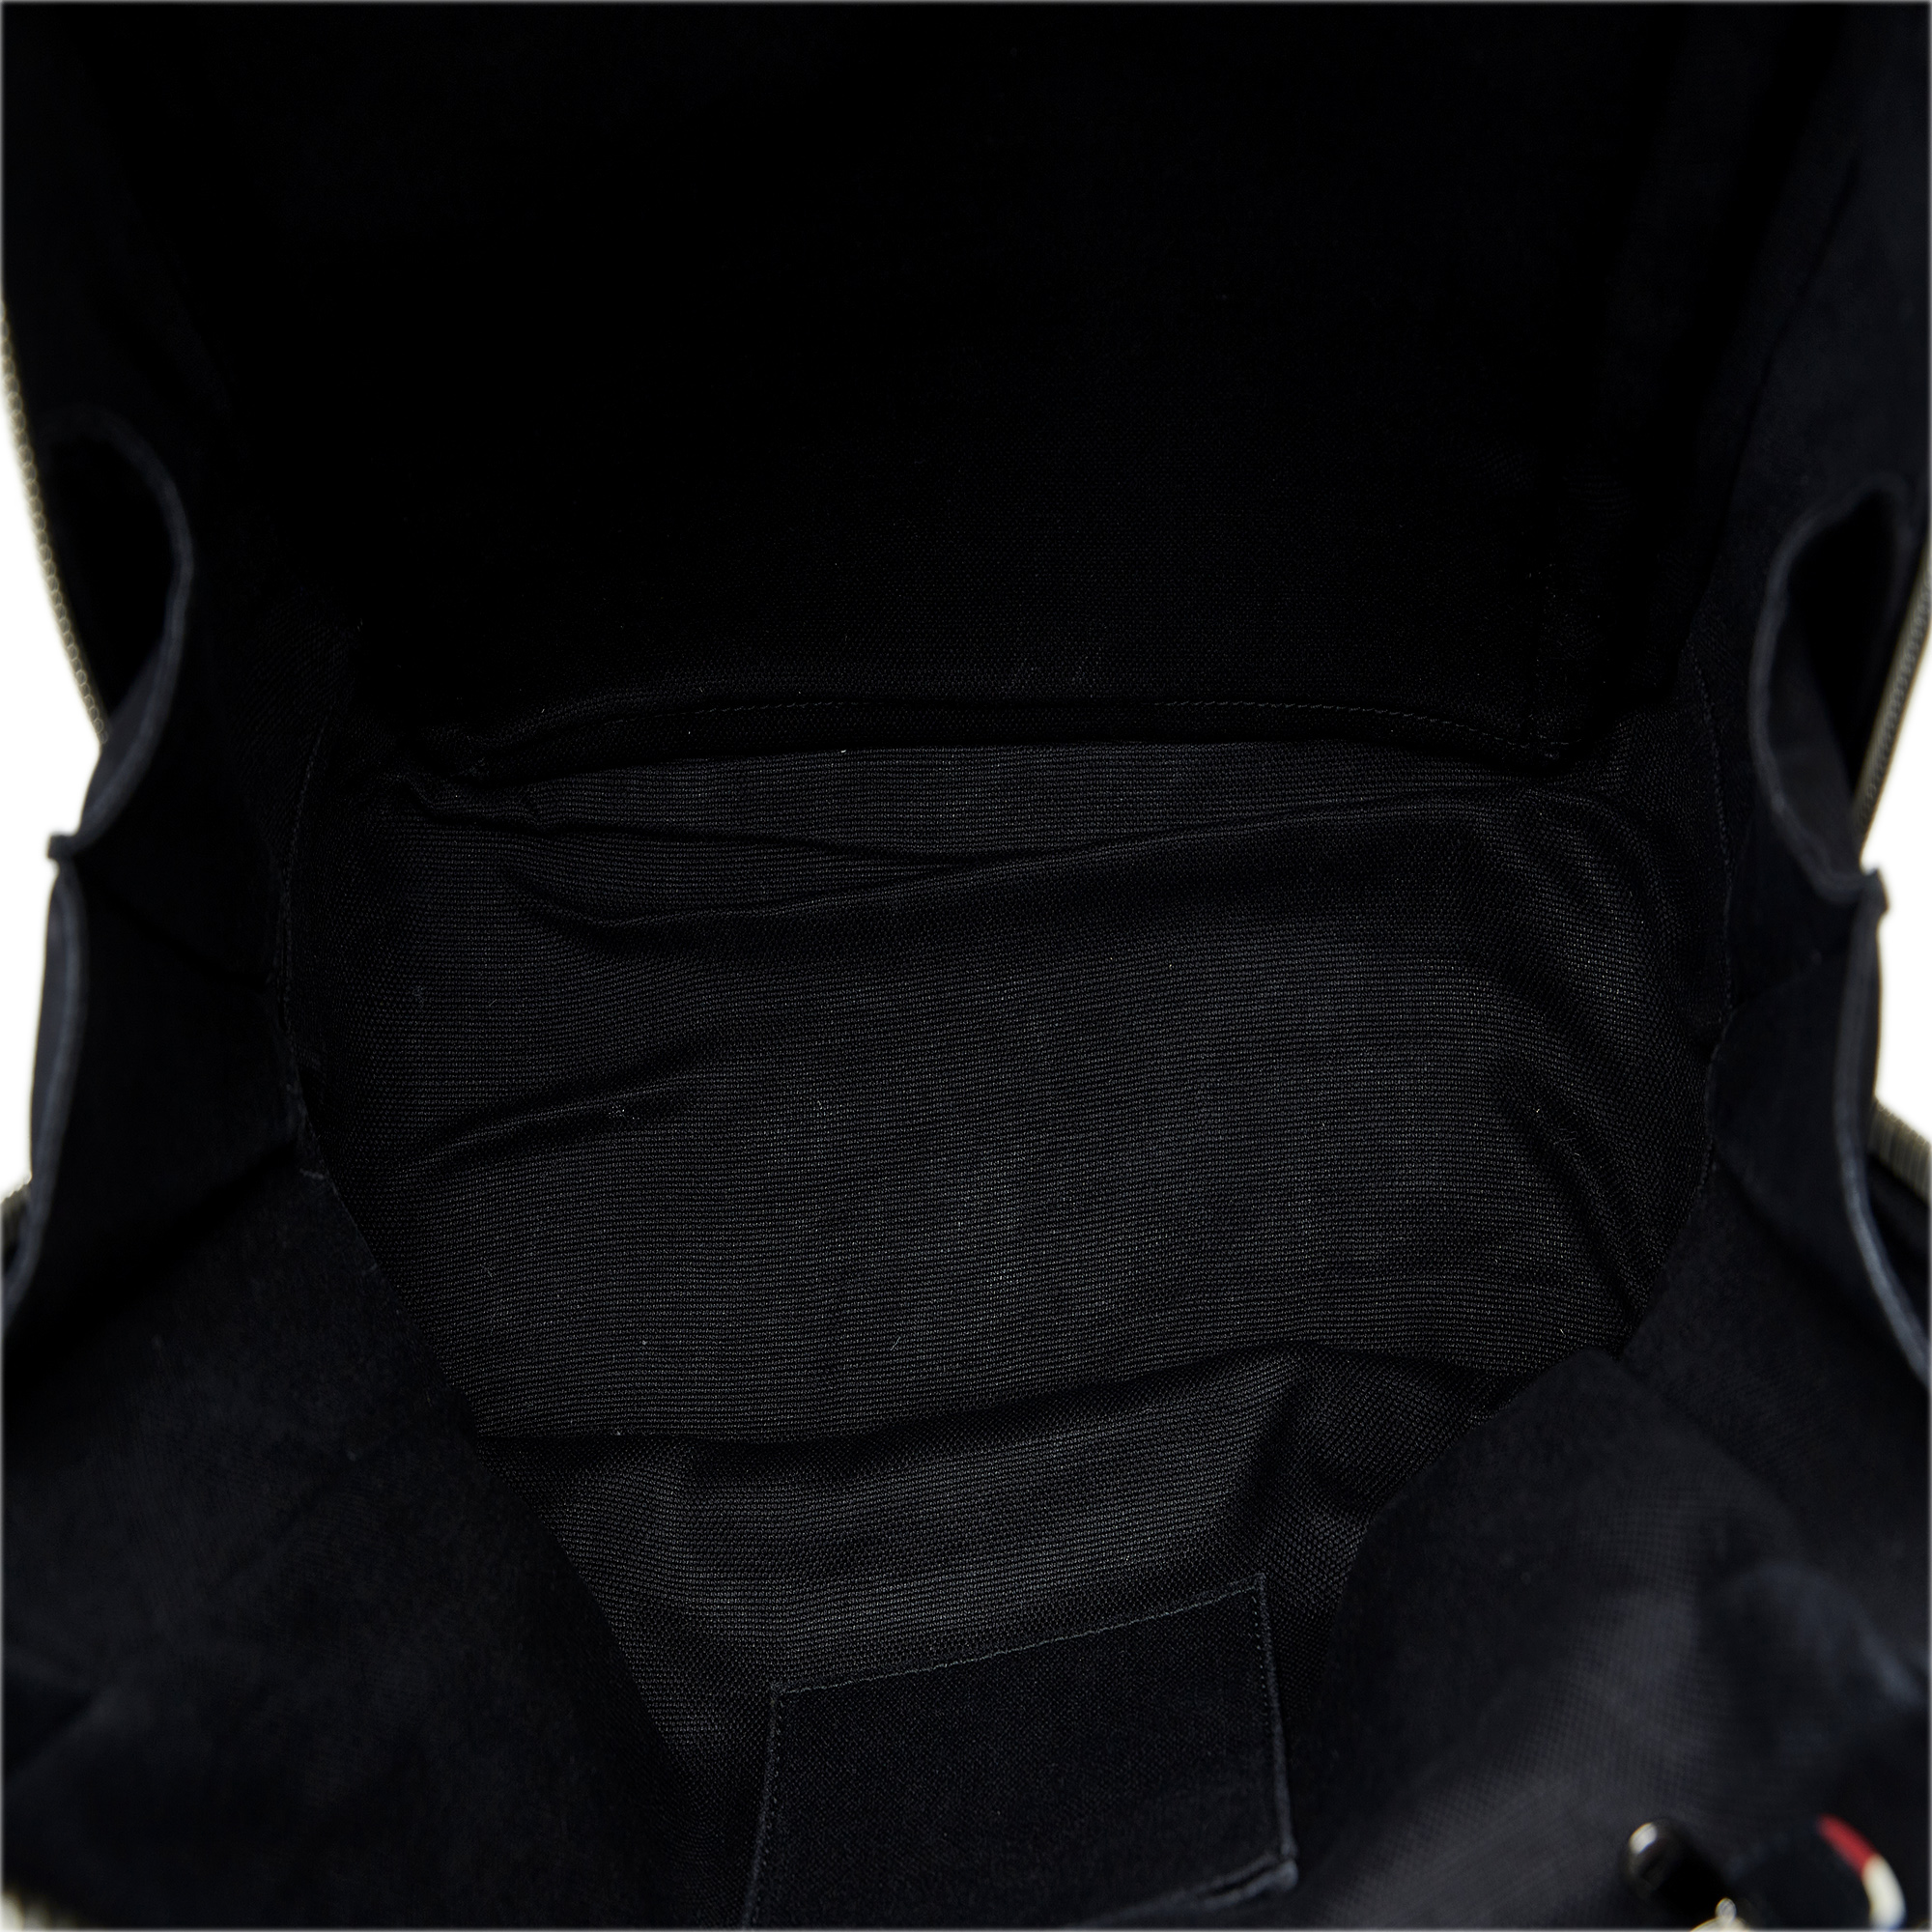 Gucci Black GG Supreme Night Courrier Backpack